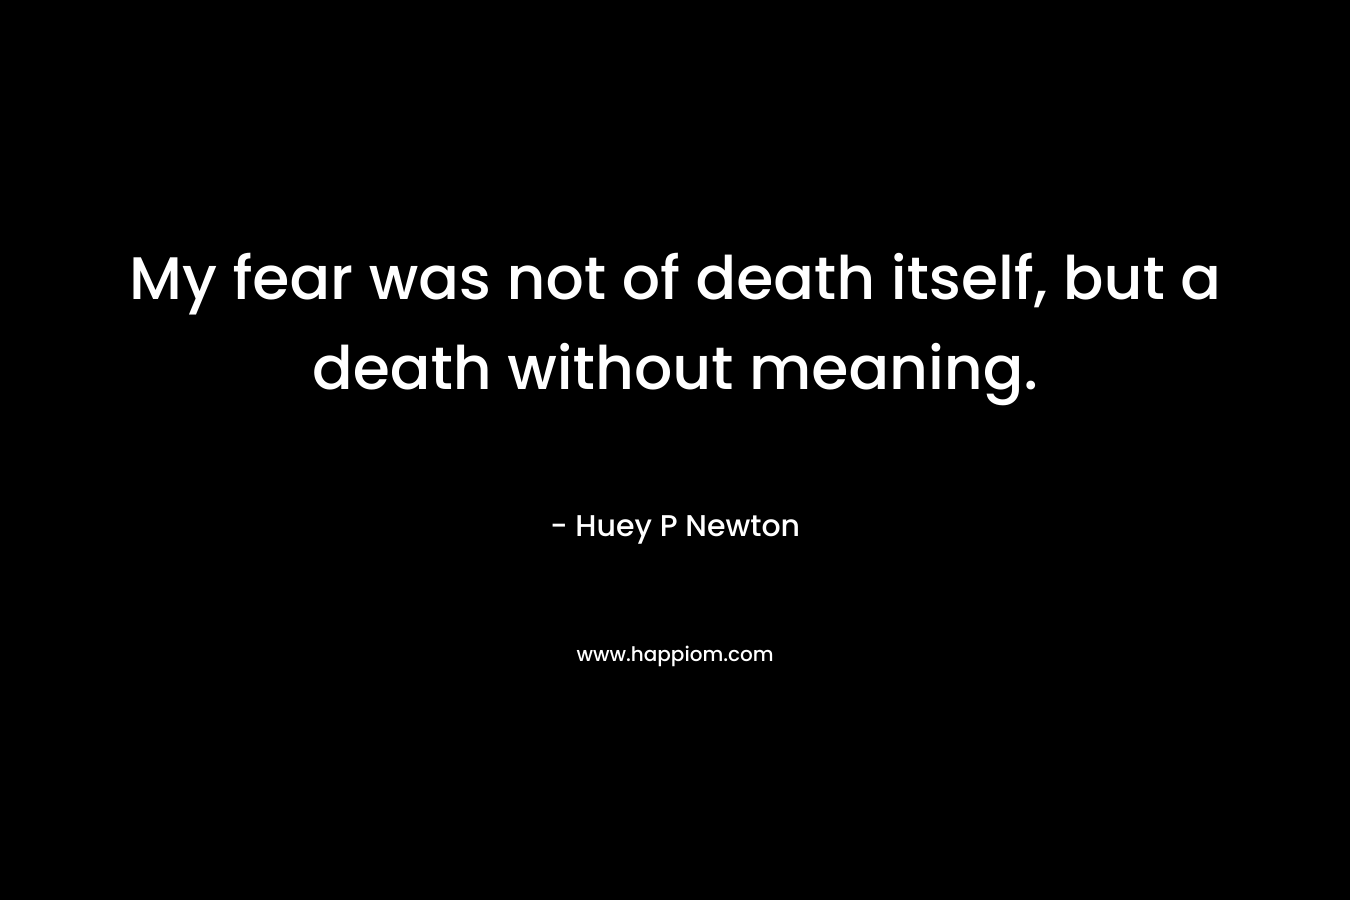 My fear was not of death itself, but a death without meaning. – Huey P Newton